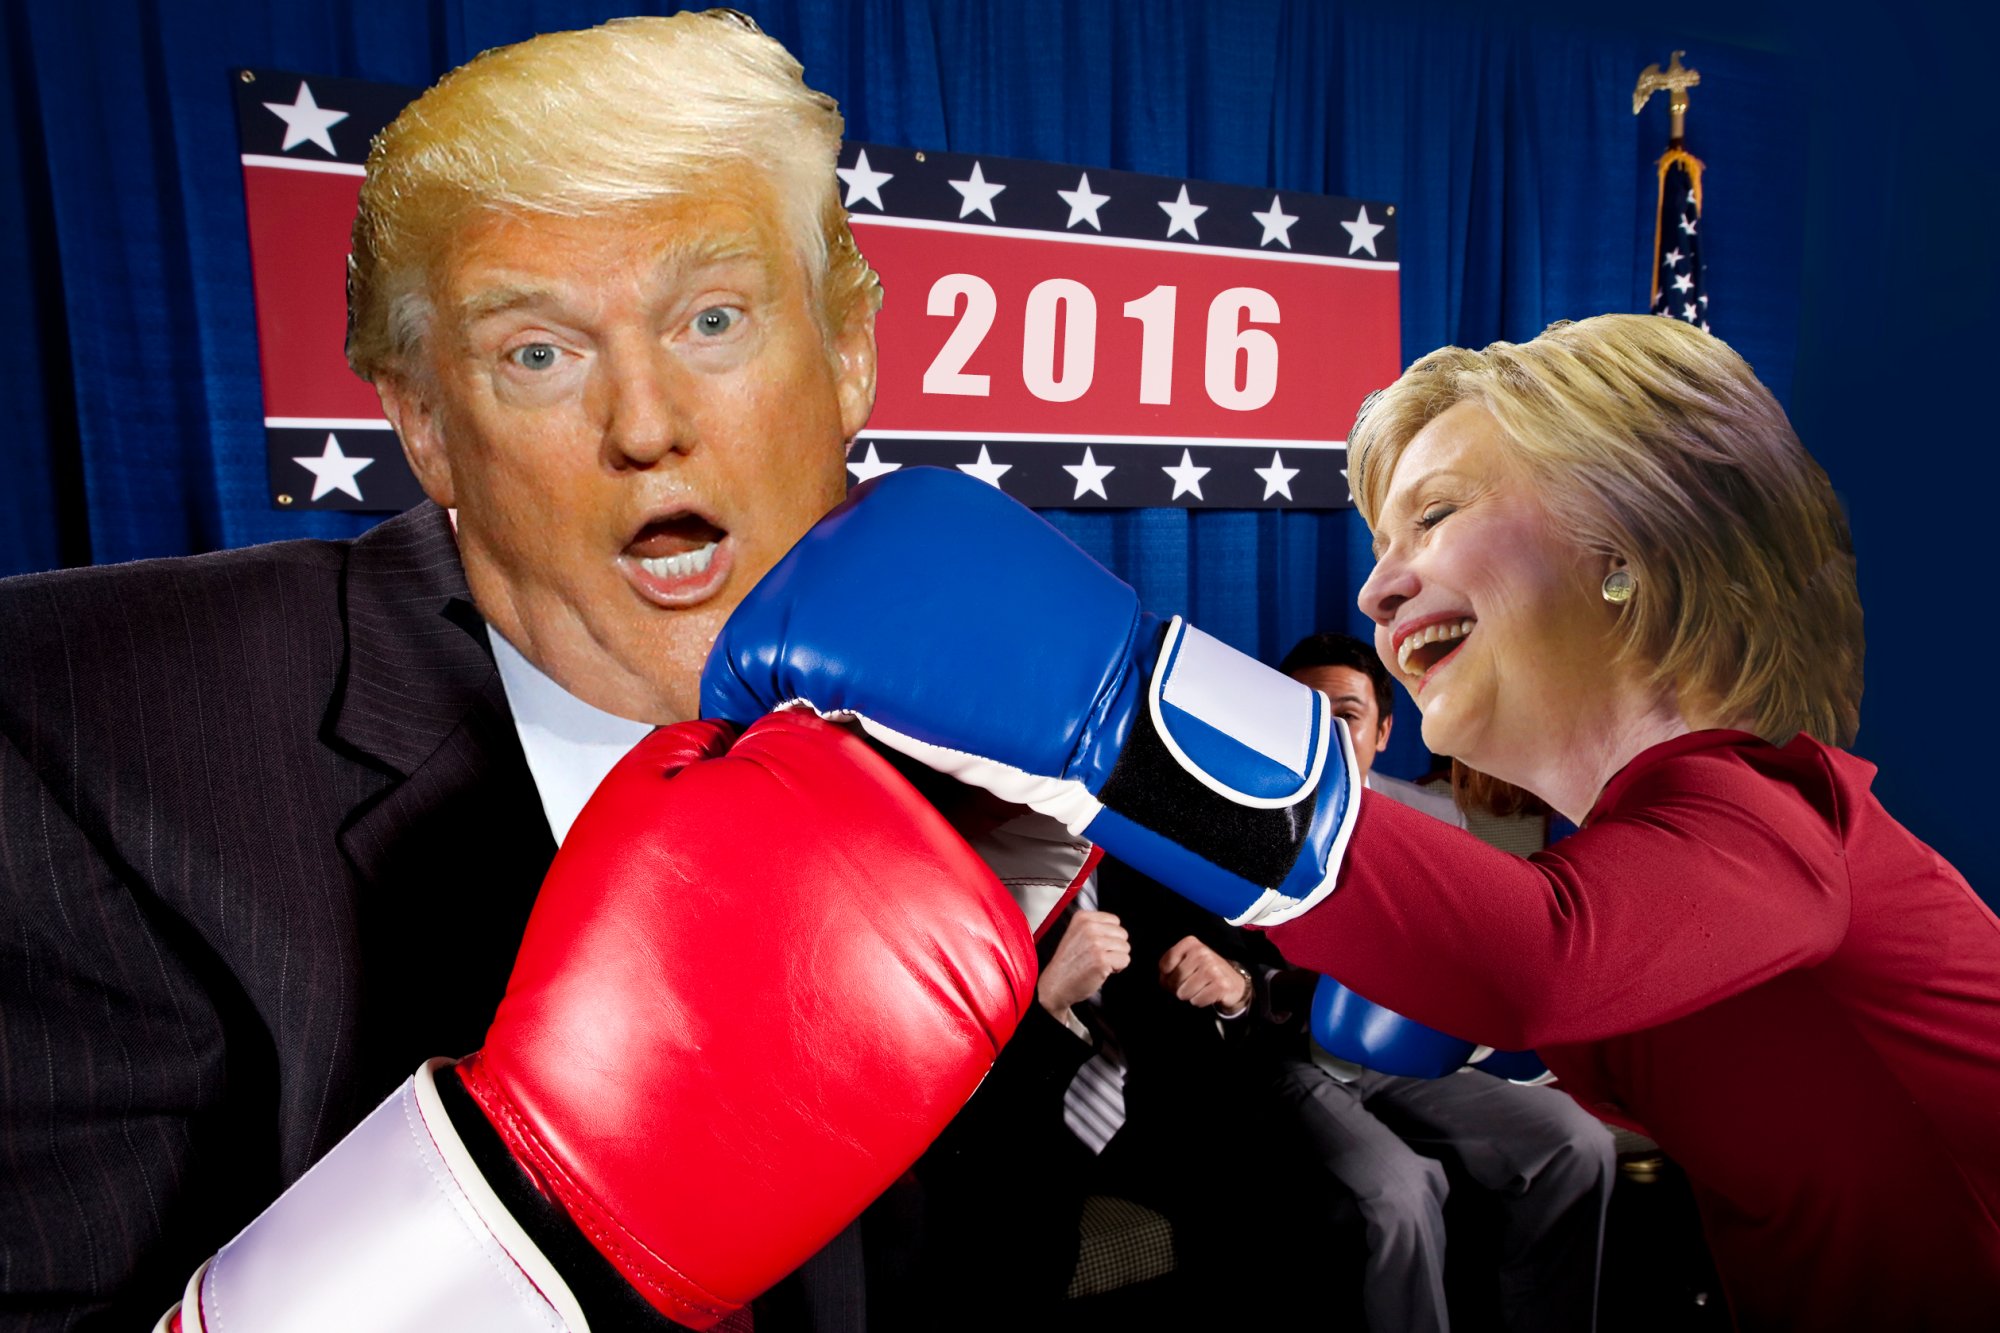 COUNTER-PUNCH: Eighteen Ways Trump Can KO Hillary … With Her OWN Words